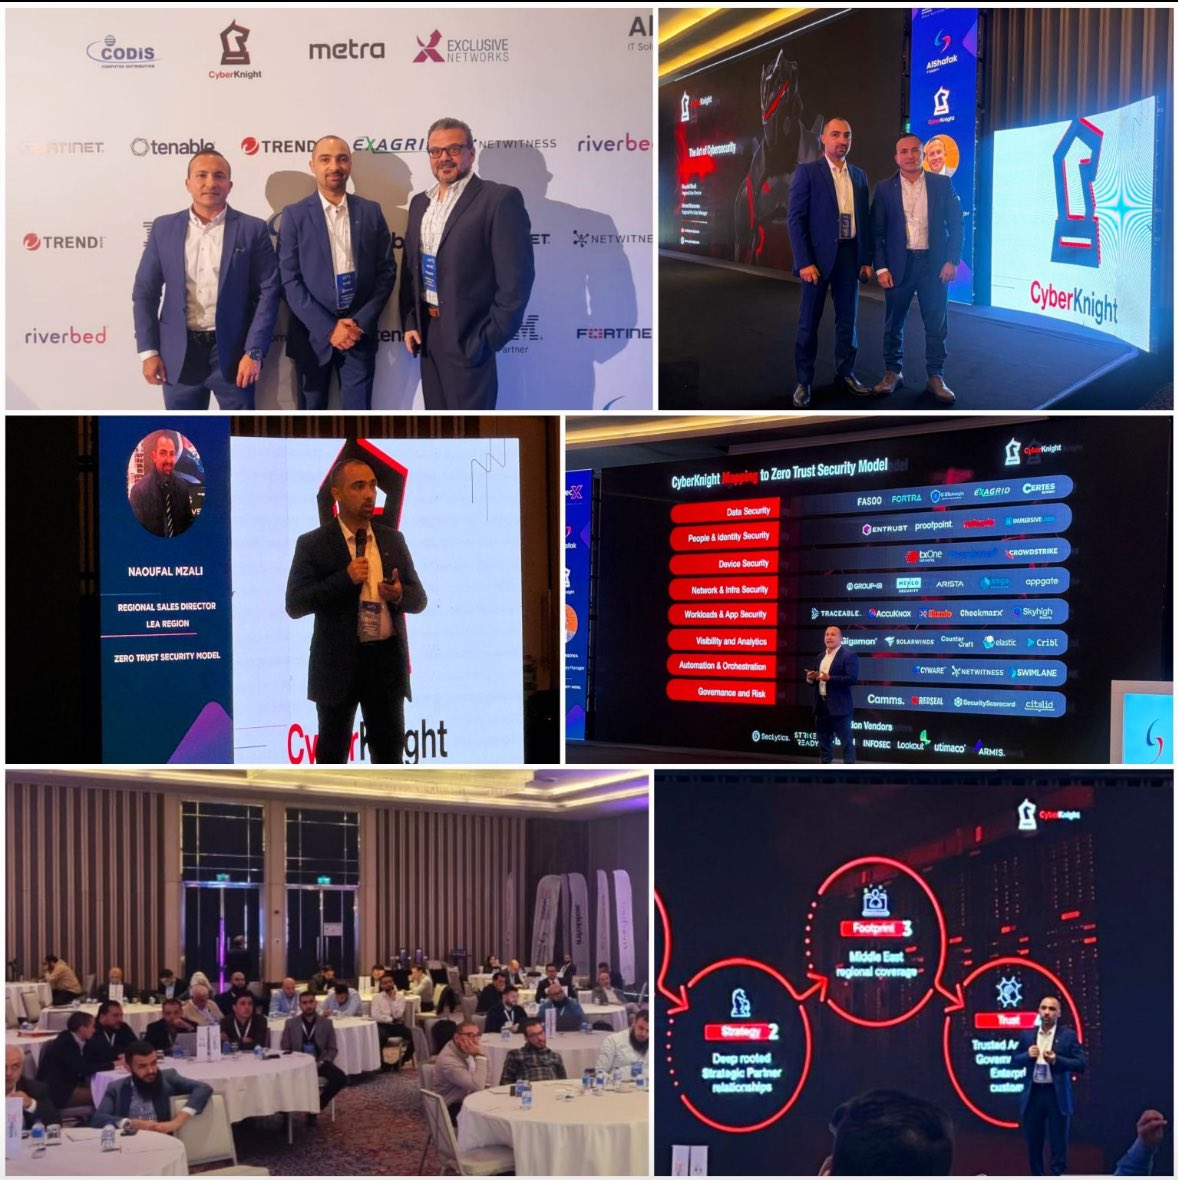 Flashback from Istanbul - the #InfoSecX event by Alshafak I.T was in full swing, bringing together industry leaders to discuss #cybersecurity in the financial sector. Proudly sponsored by #CyberKnight, @NetWitness, and @ExaGrid.